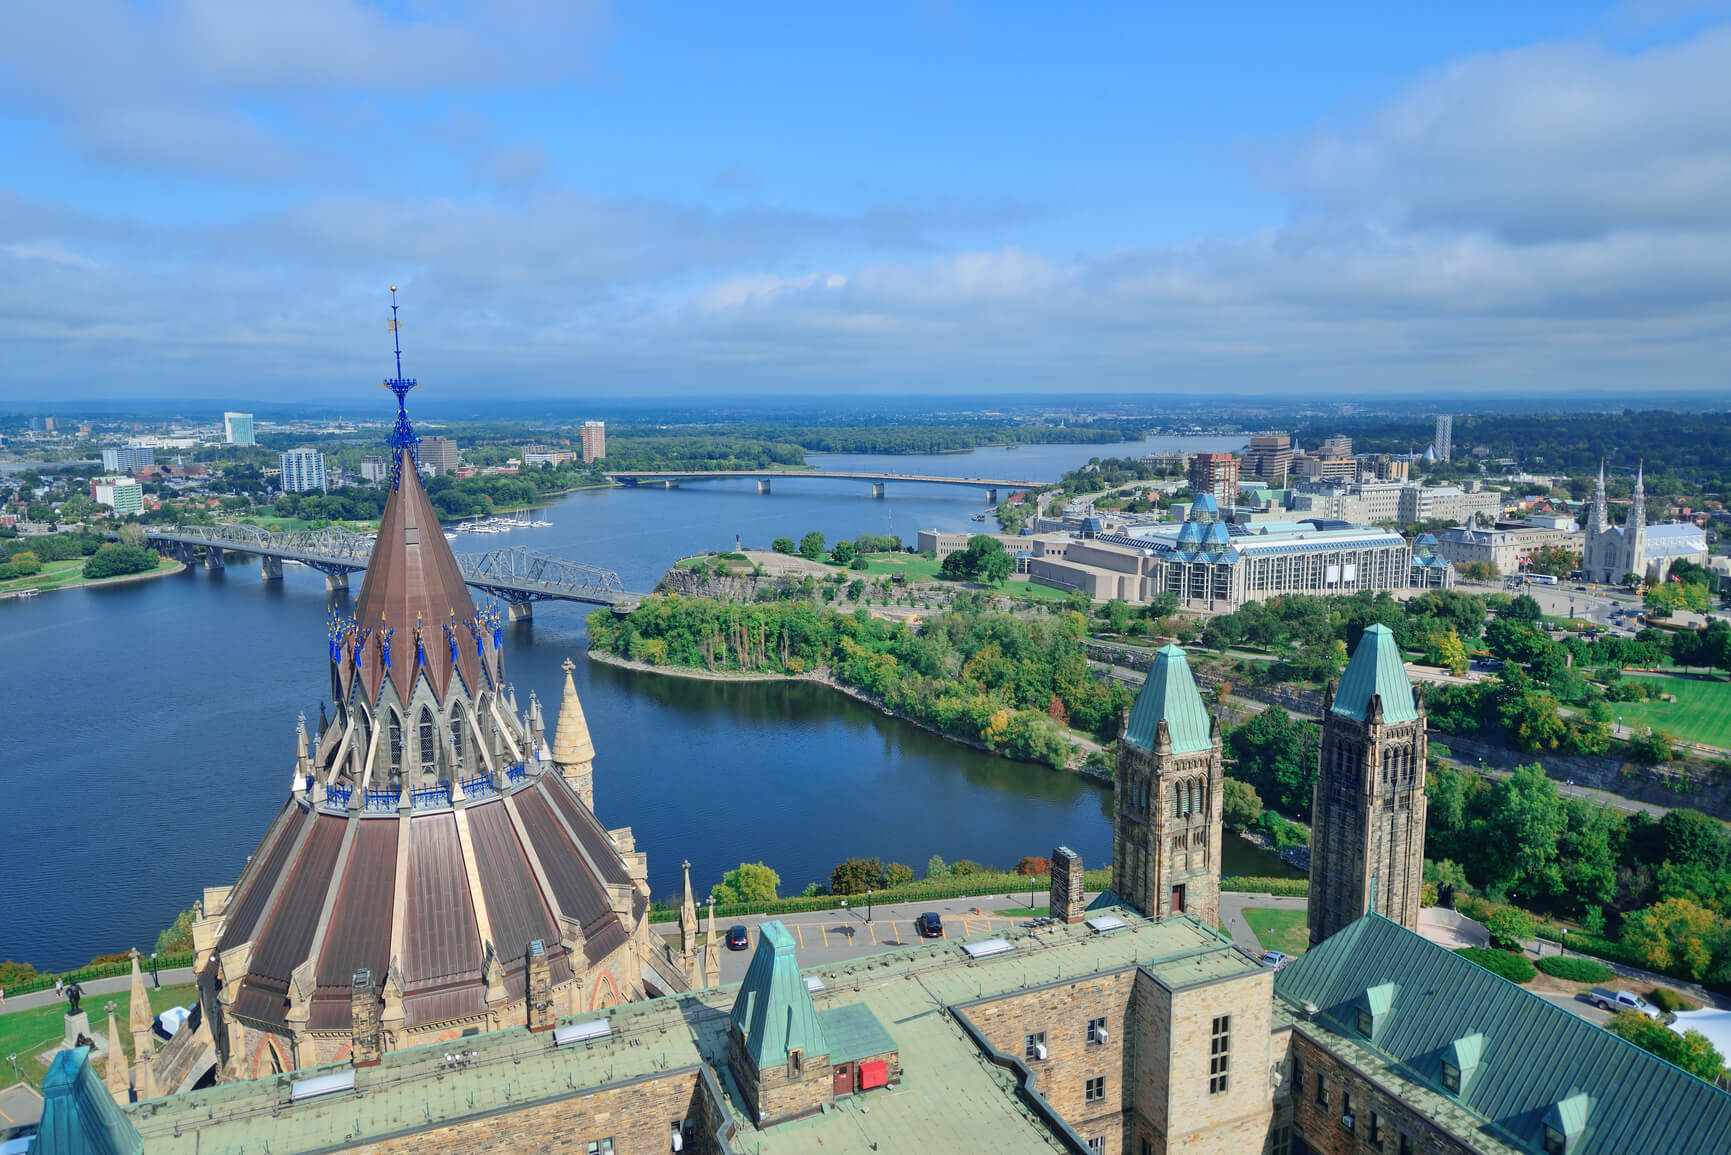 Flight deals from Vancouver, Canada to Ottawa | Secret Flying